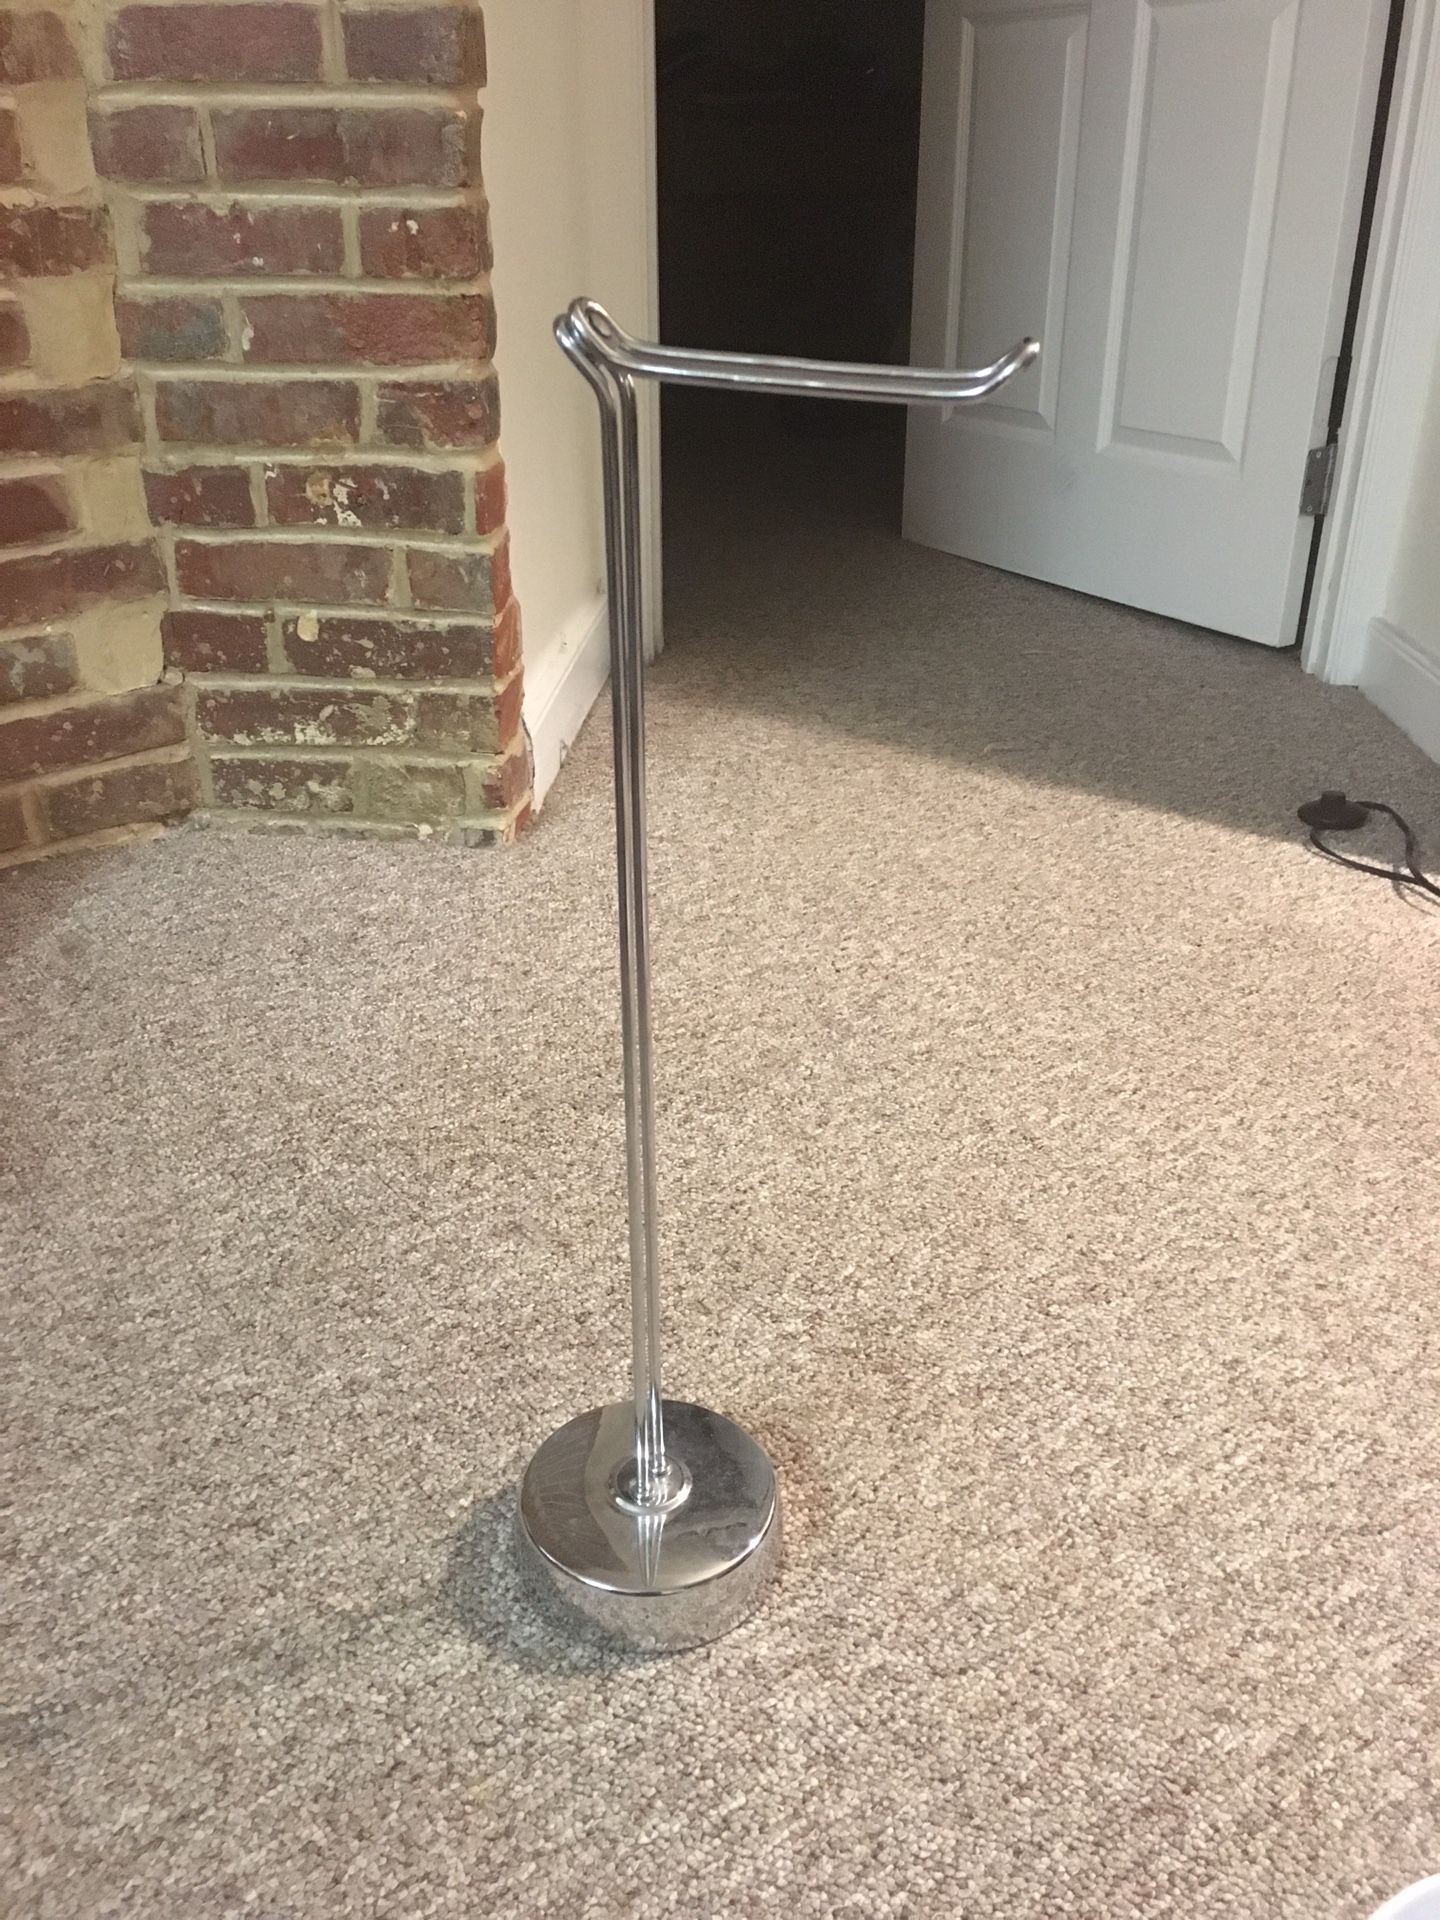 Metal toilet paper holder/stand. FREE!!